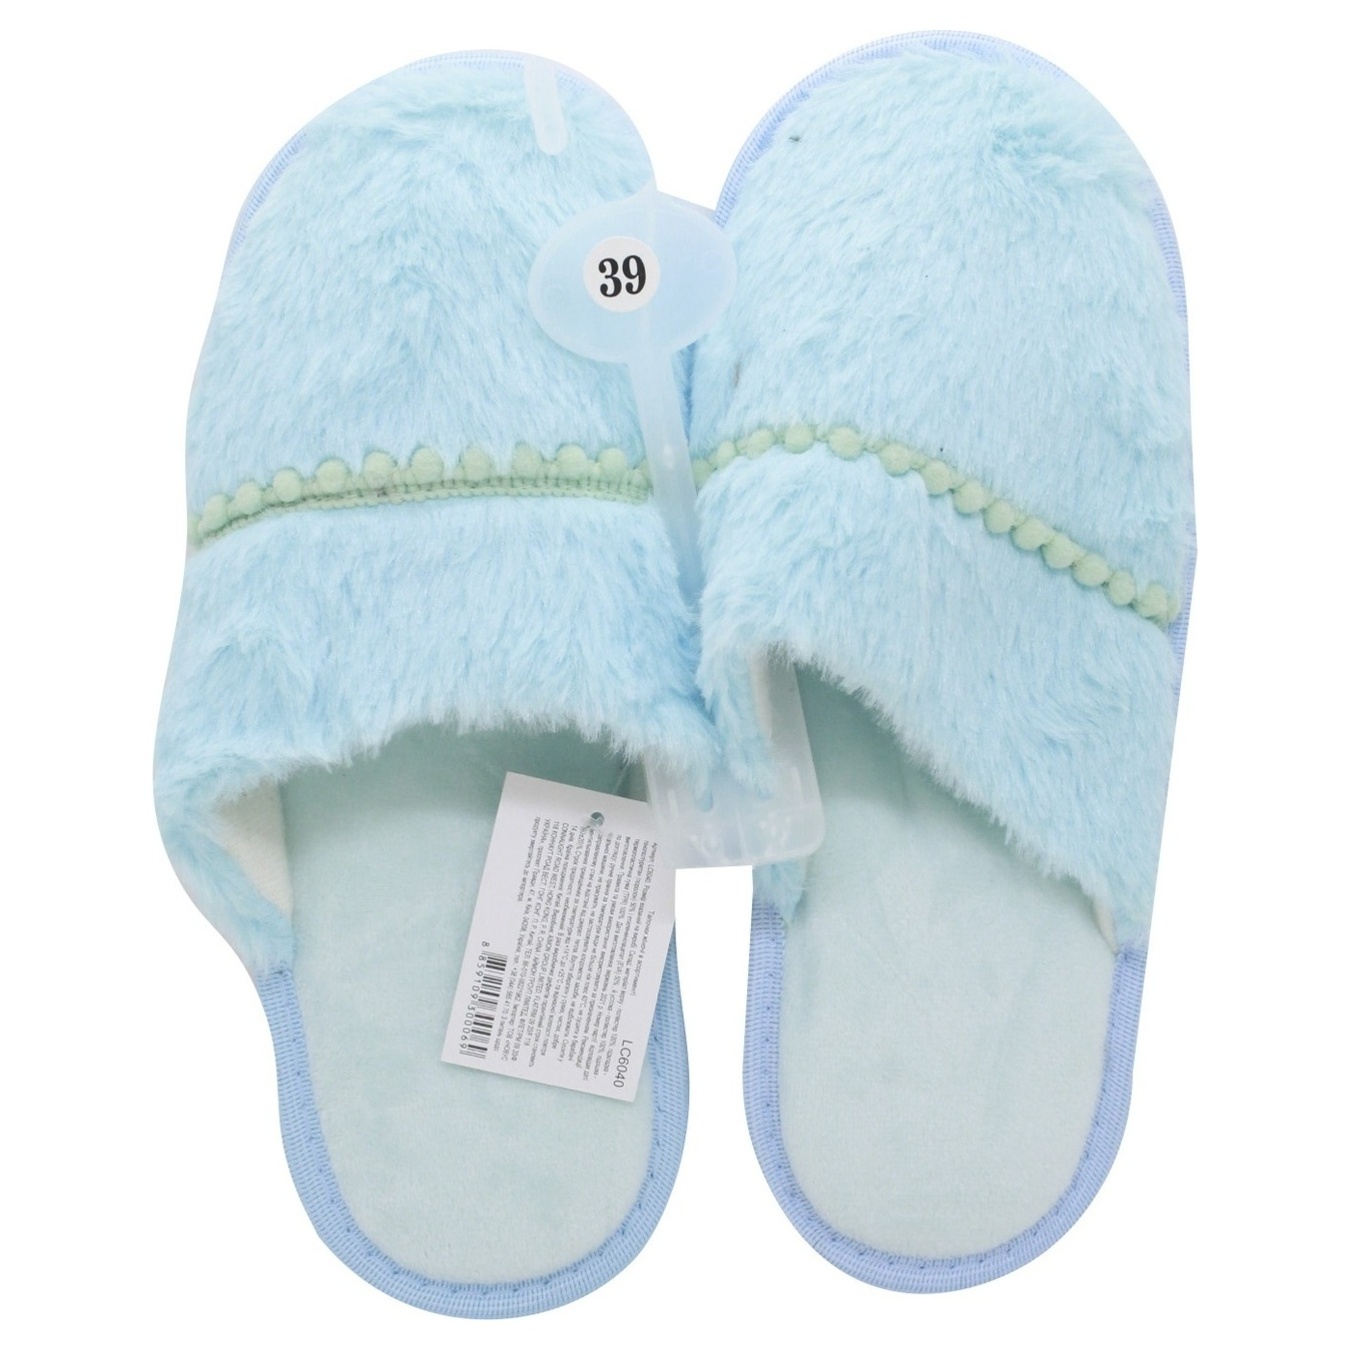 Aimon slippers for women in the pile assortment 3